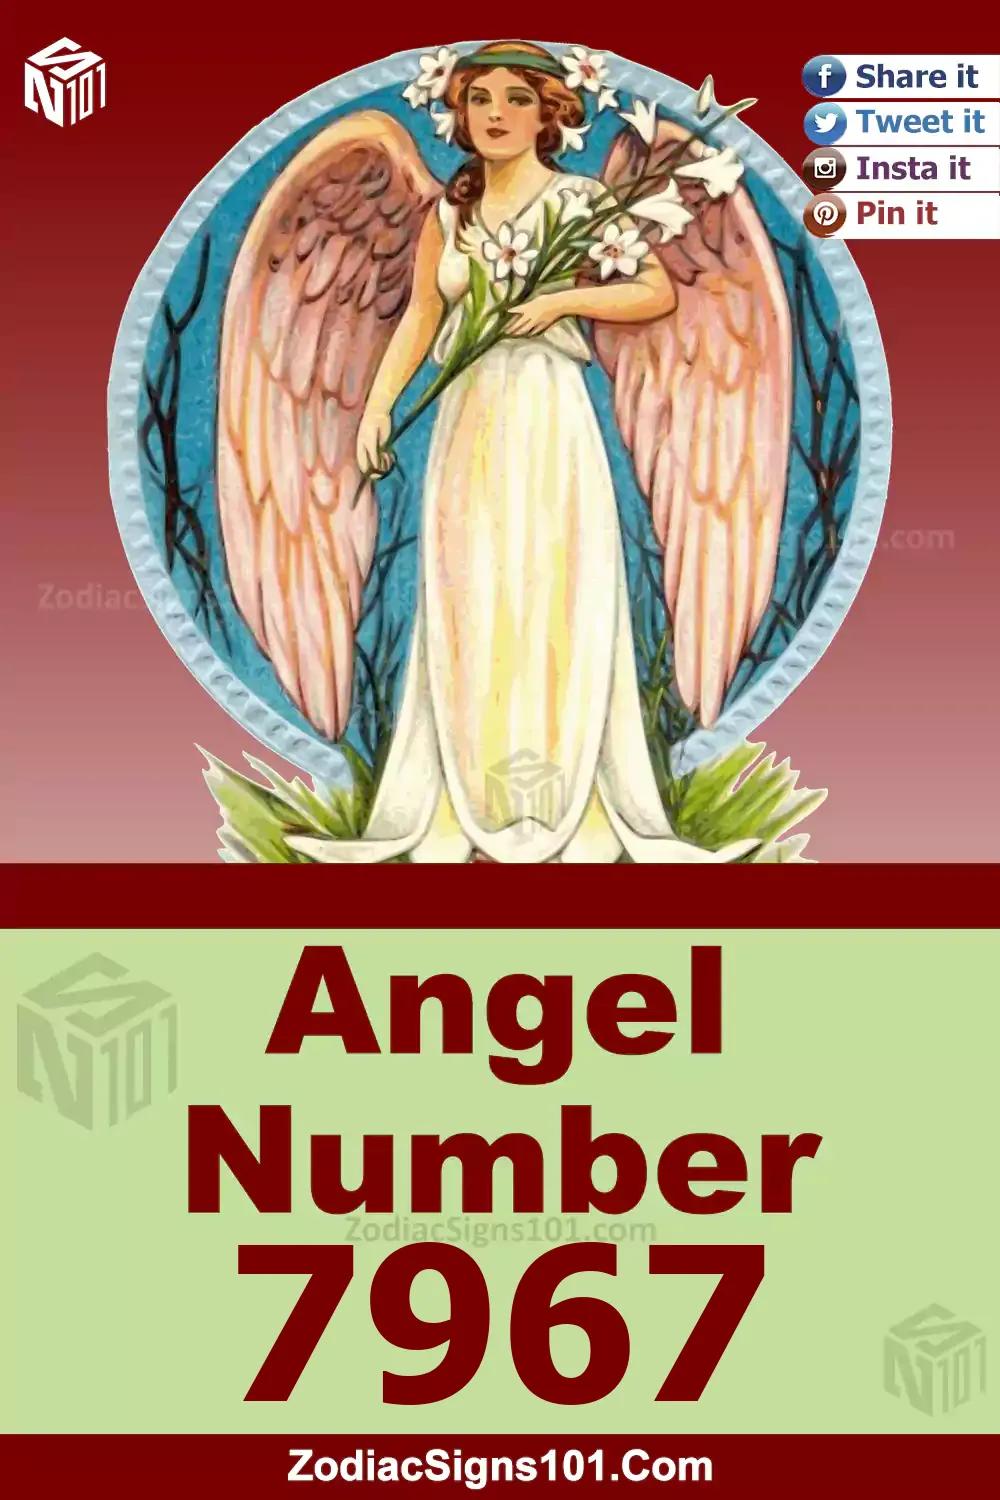 7967 Angel Number Meaning